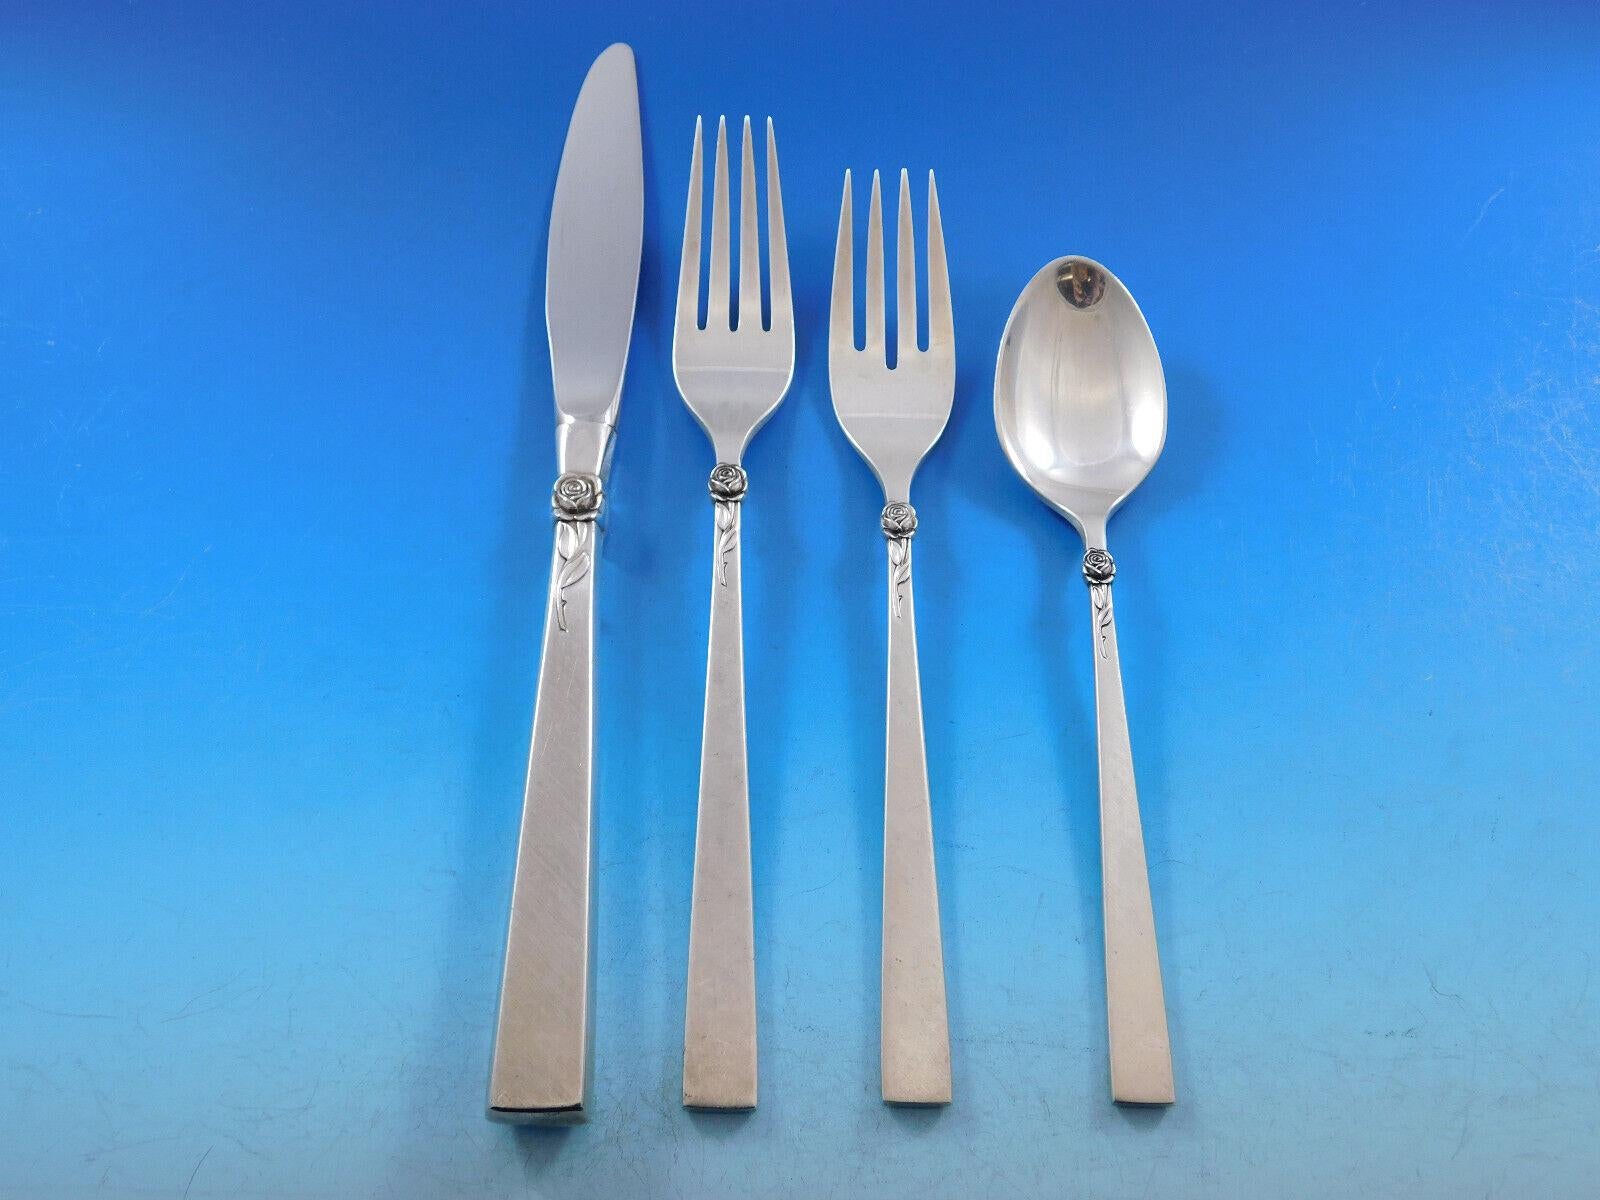 Dawn rose by international circa 1969 sterling silver Flatware set - 20 Pieces. This set includes:

4 Knives, 9